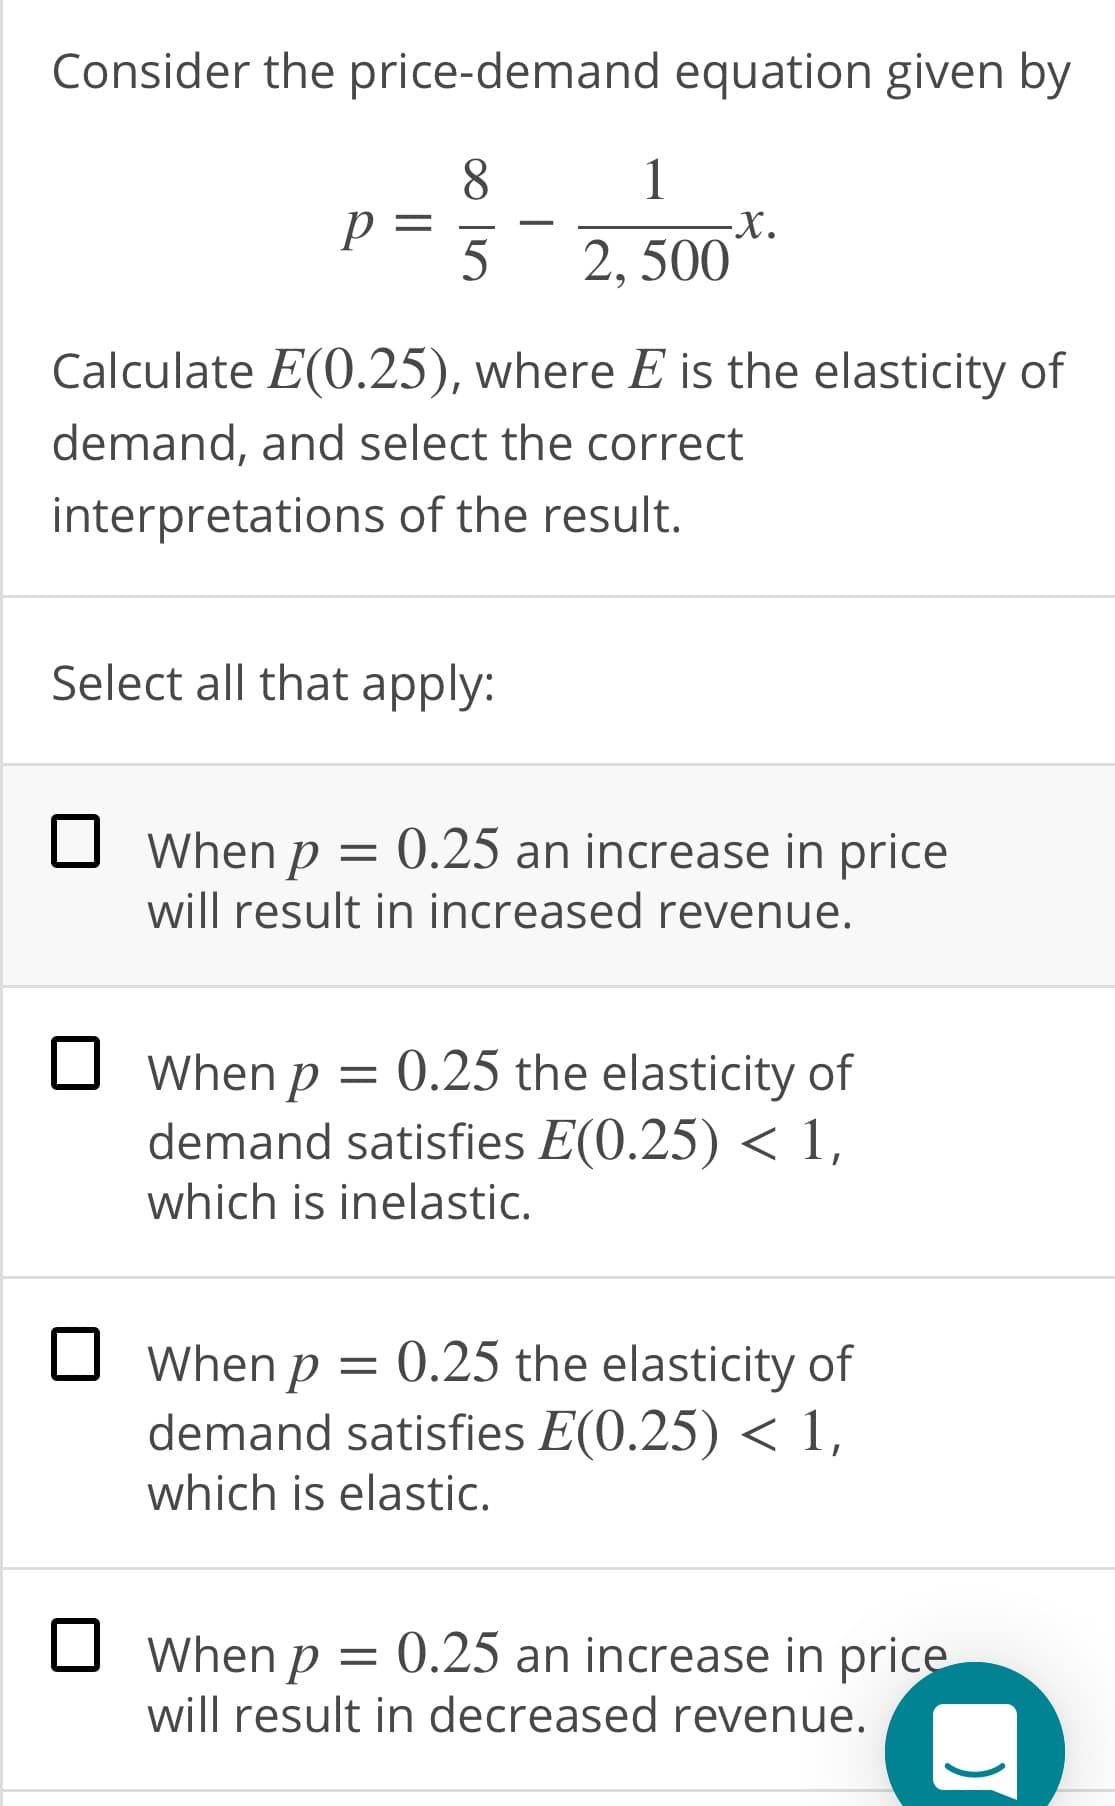 Consider the price-demand equation given by
8.
5
2, 500
Calculate E(0.25), where E is the elasticity of
demand, and select the correct
interpretations of the result.
Select all that apply:
O When p = 0.25 an increase in price
will result in increased revenue.
O When p = 0.25 the elasticity of
demand satisfies E(0.25) < 1,
which is inelastic.
When p = 0.25 the elasticity of
demand satisfies E(0.25) < 1,
which is elastic.
O When p =
will result in decreased revenue.
0.25 an increase in price
